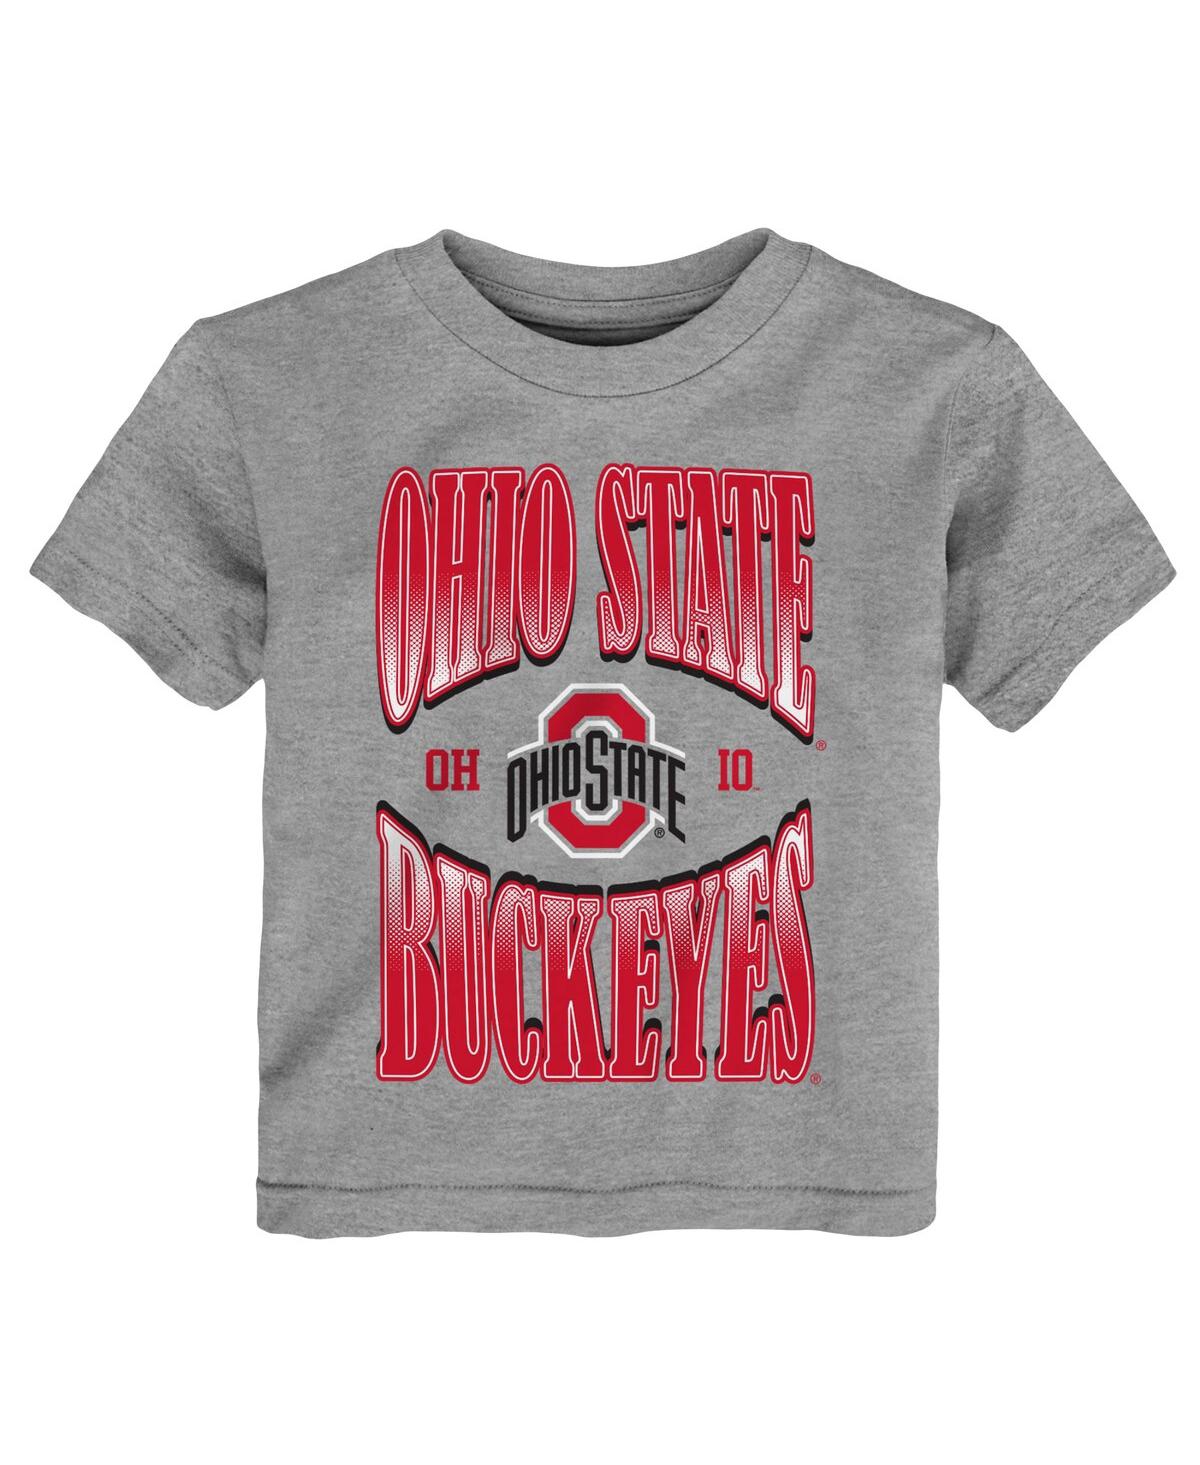 Outerstuff Babies' Toddler Boys And Girls Heather Gray Ohio State Buckeyes Top Class T-shirt